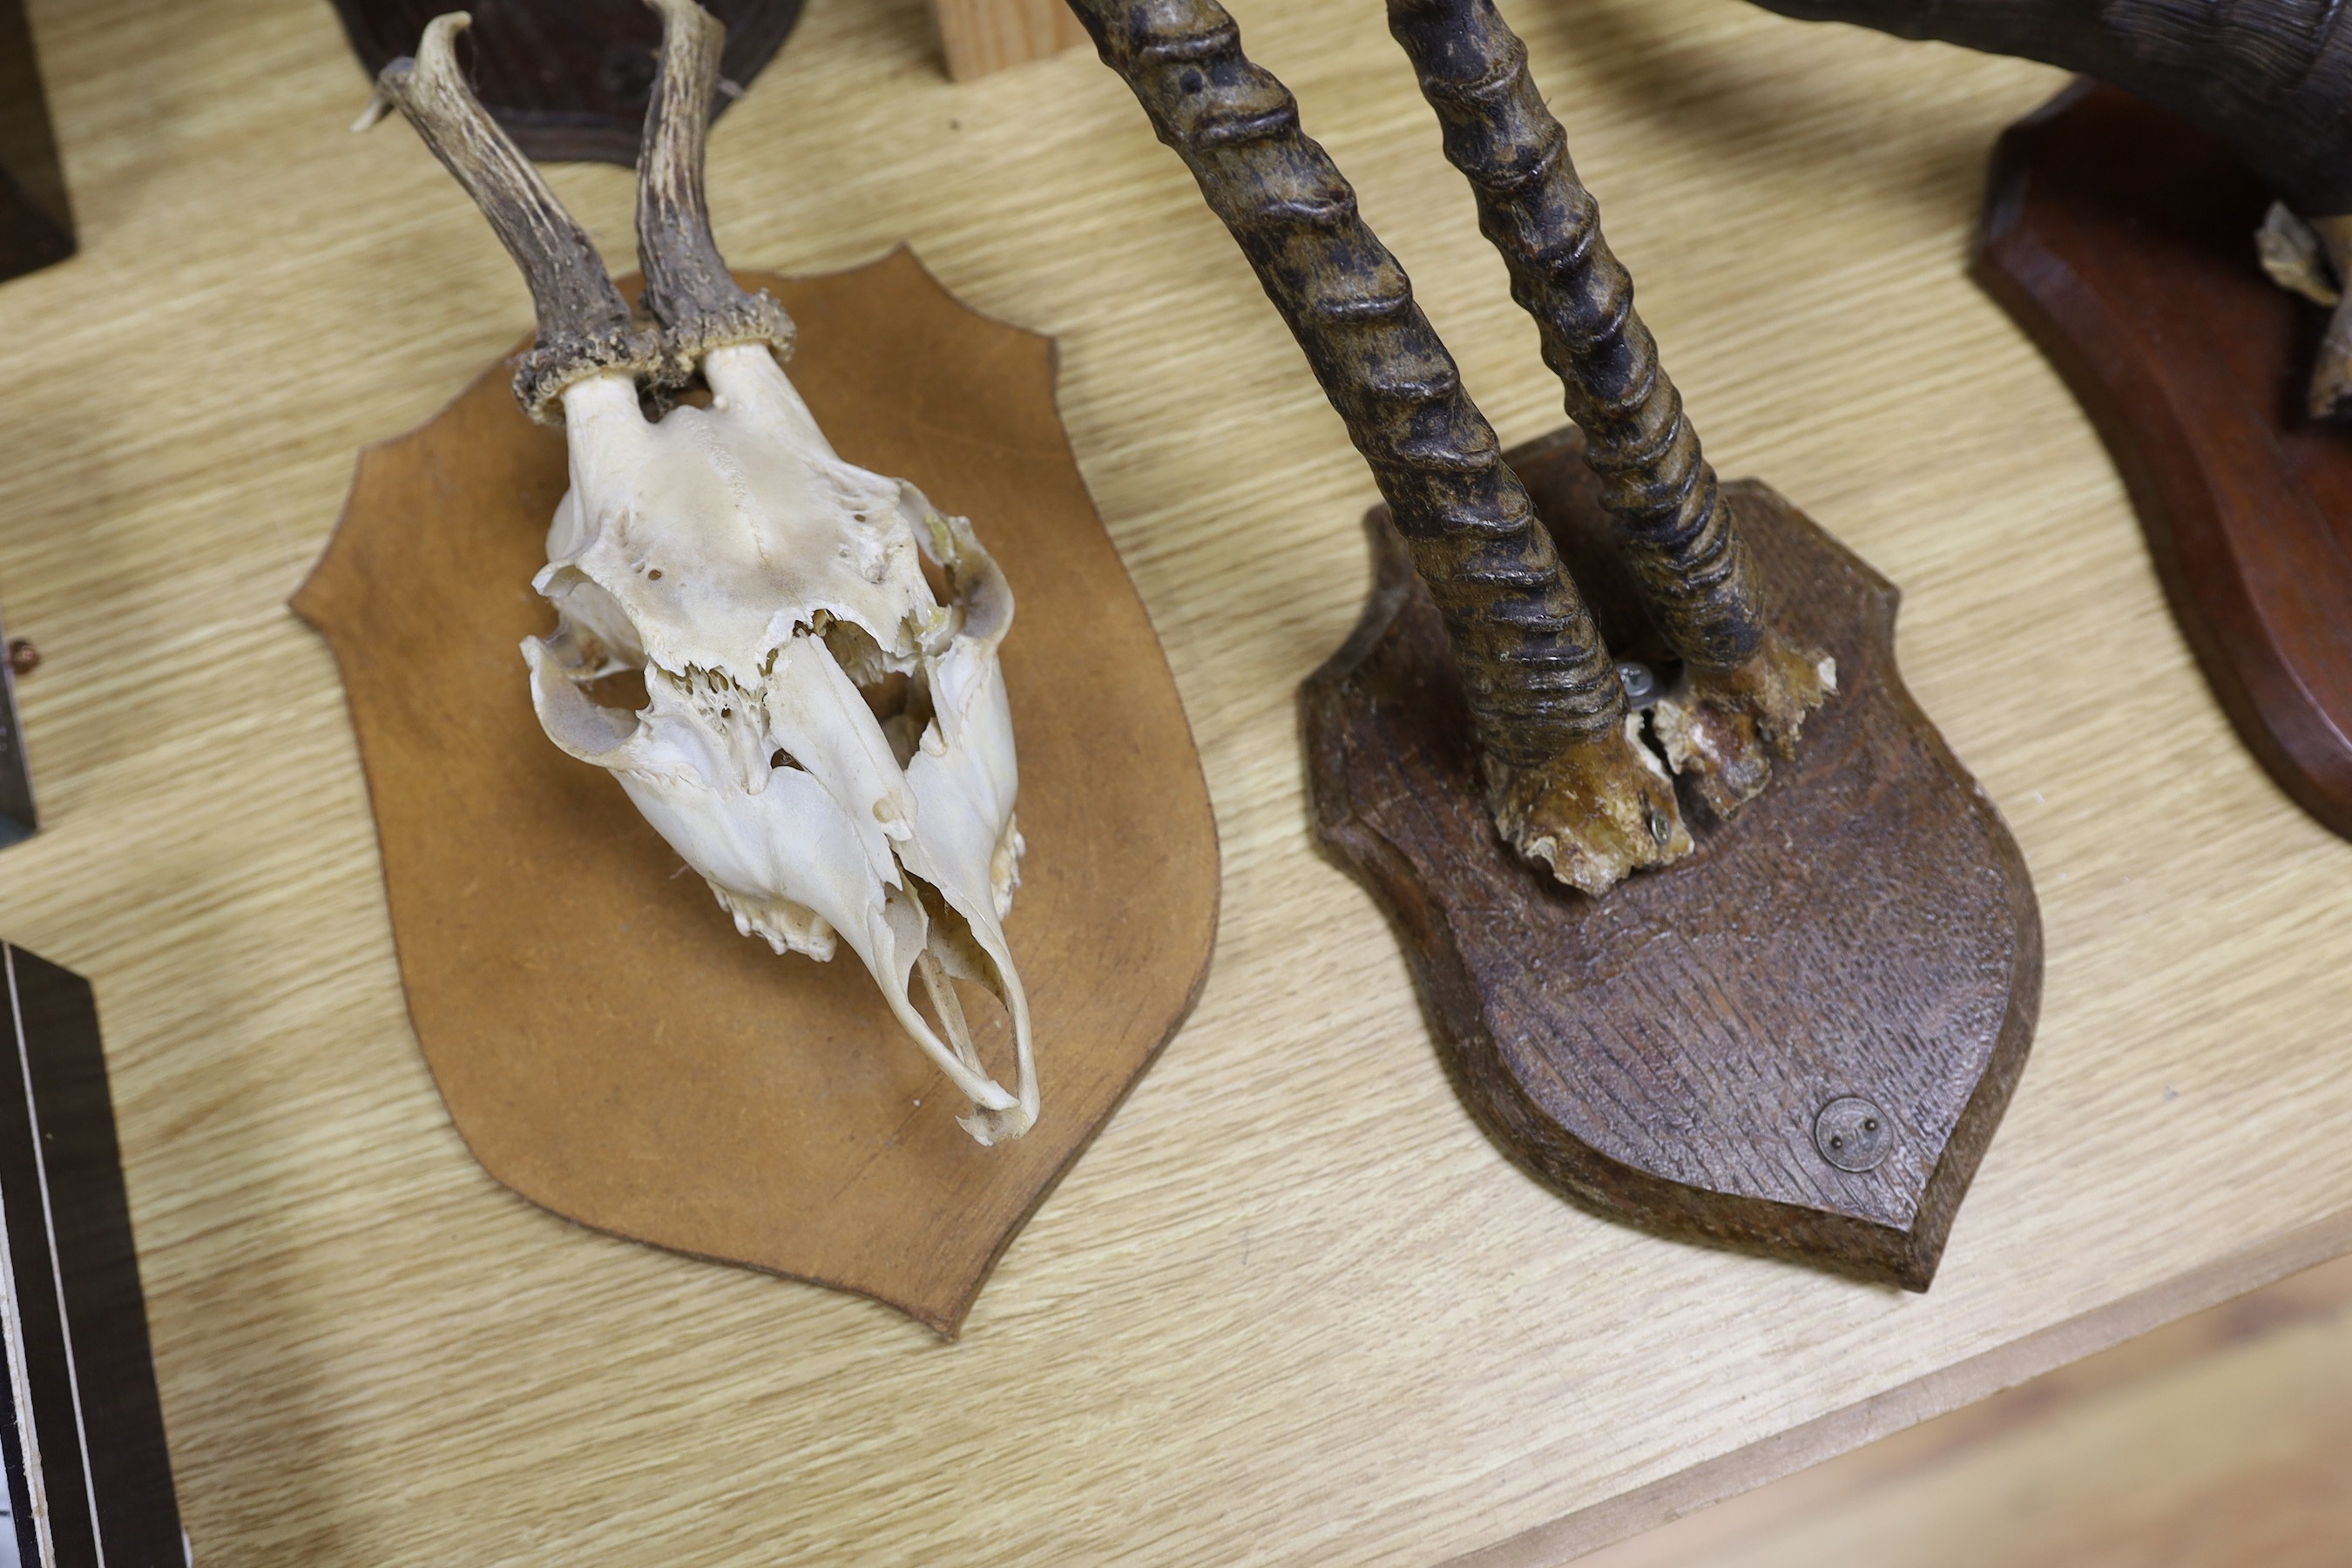 Animal anatomy- mounted pairs of horns on skulls or craniums, to include a water buffalo, 67 cm wide, deer antlers and gazelle horns (7)